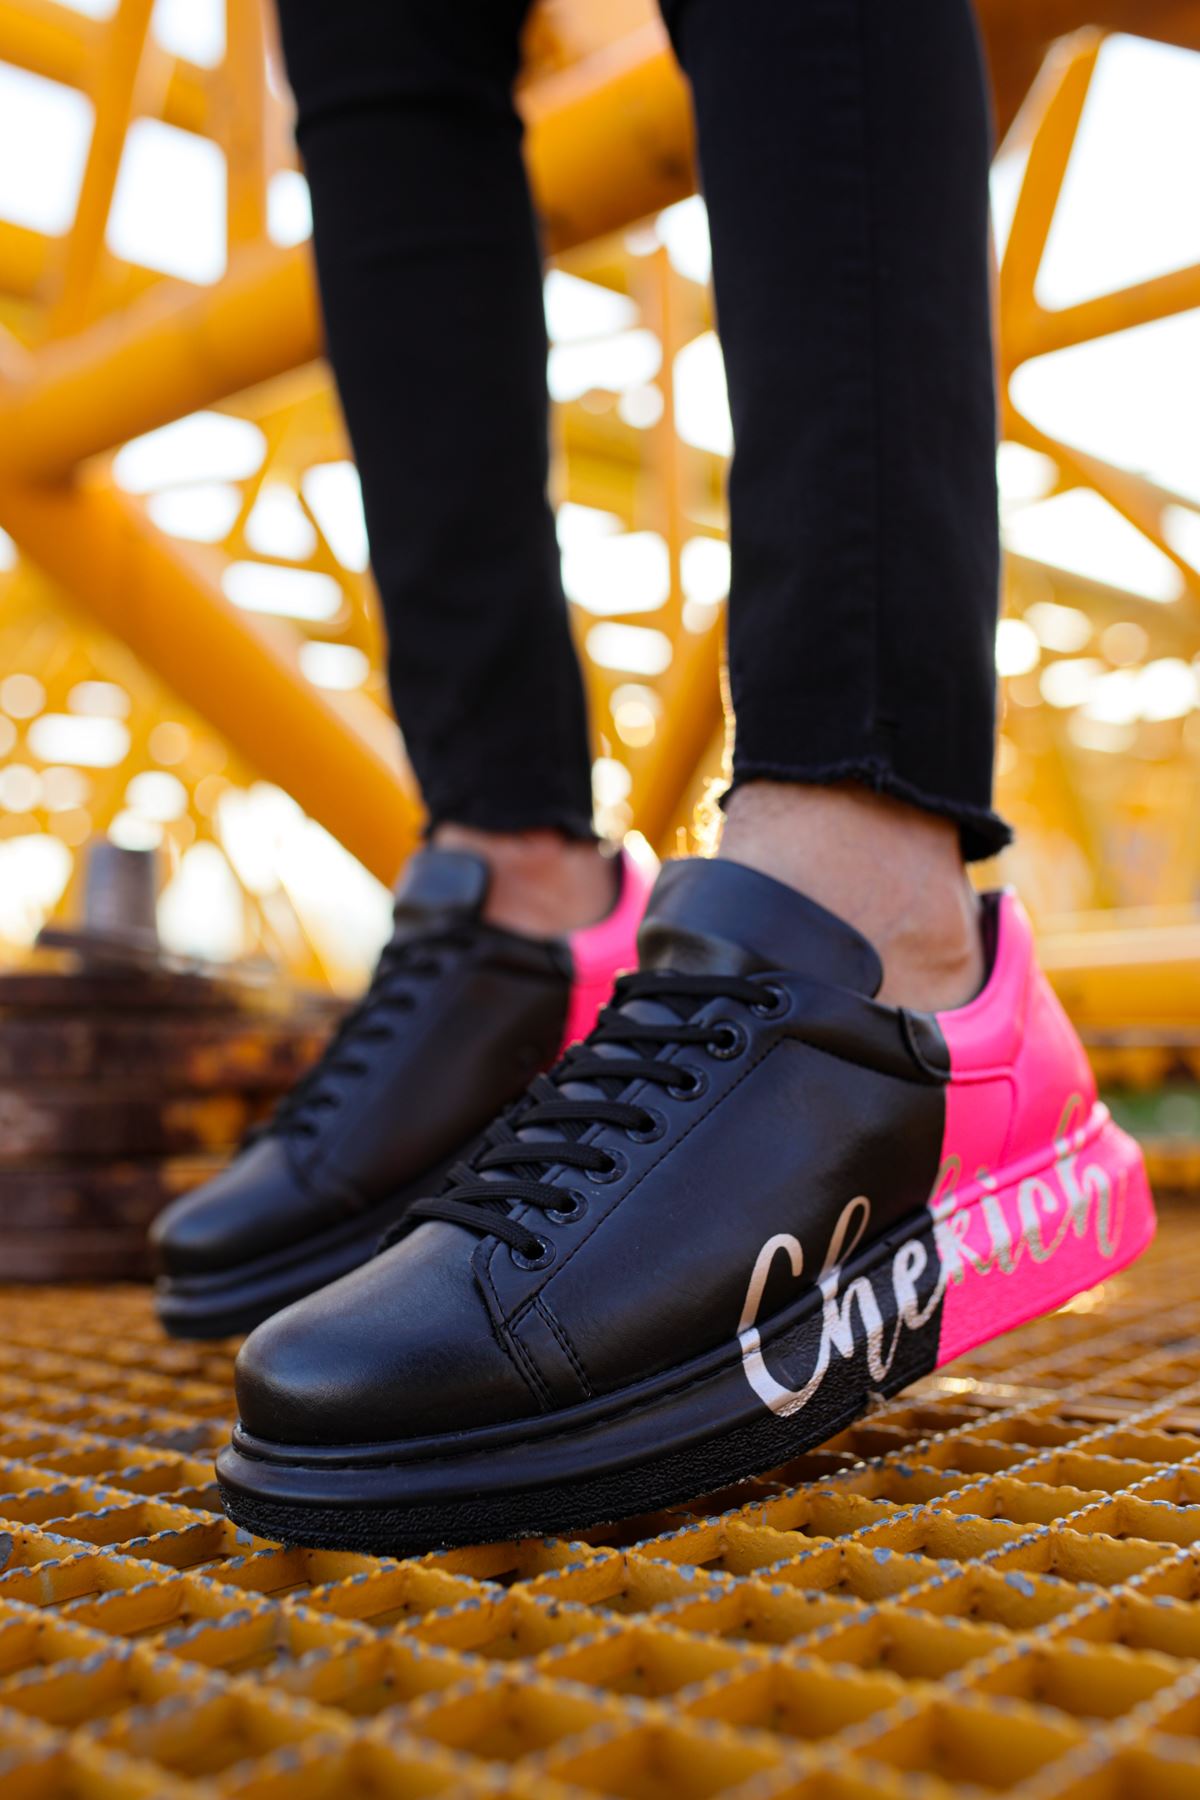 Chekich Men's and Women's Sneakers Black Pink Mixed Color Written Lace-up Splash Pattern Unisex Shoes Odorless Casual Air Comfortable Lovers Different Options Hiking Spring Summer Autumn Seasons CH254 - 477